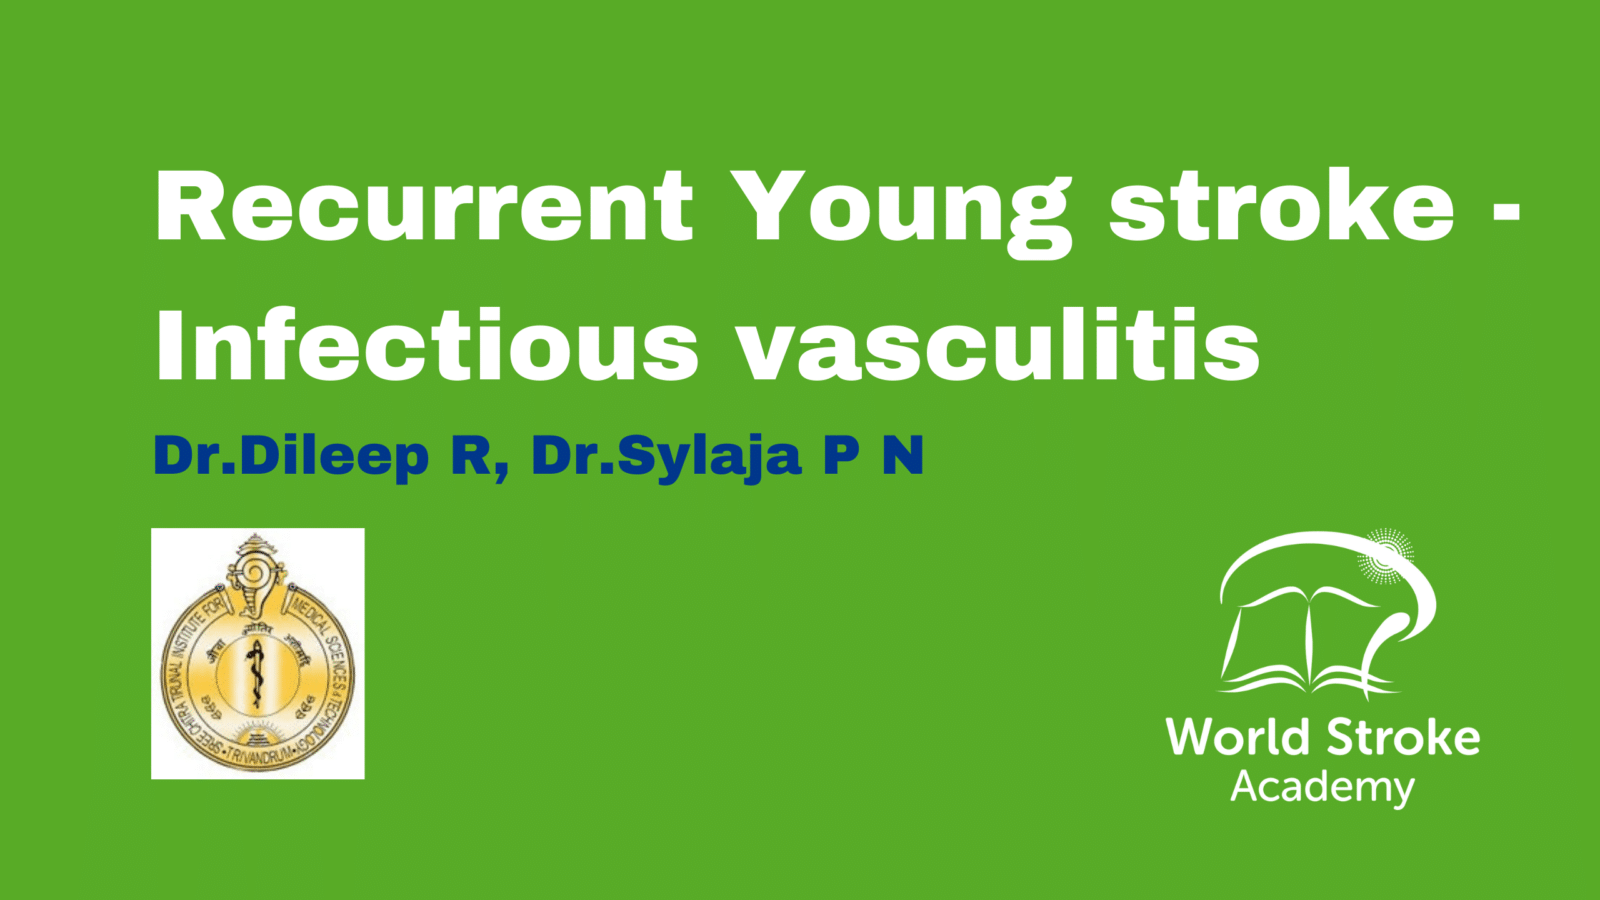 Recurrent Young stroke – Infectious vasculitis